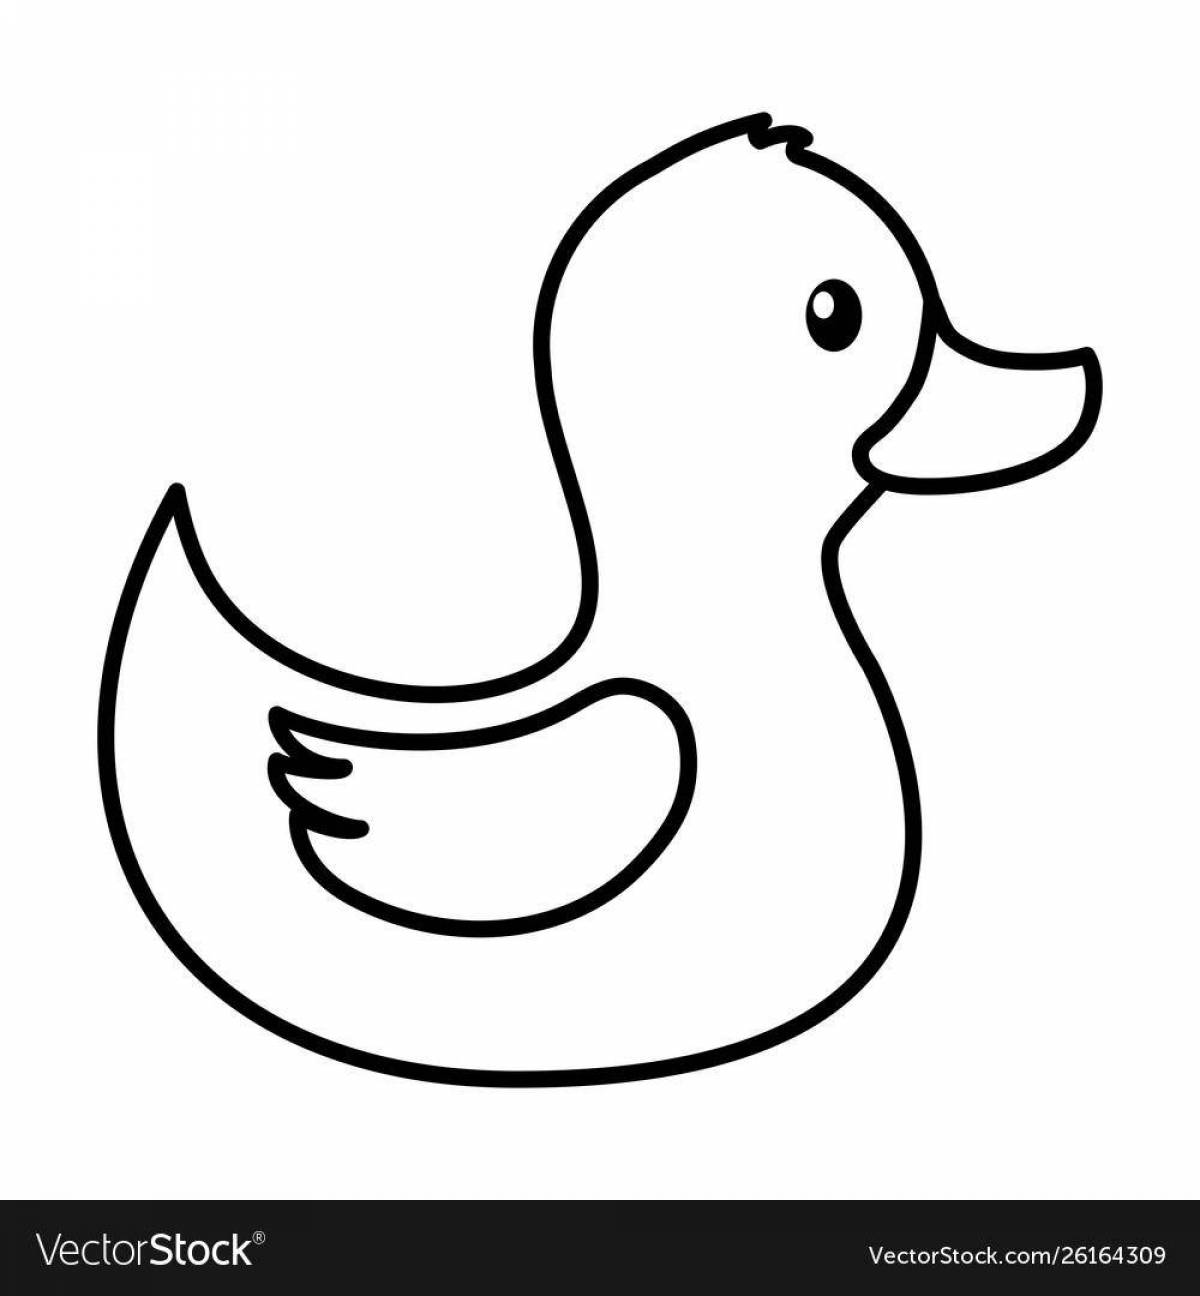 Amazing rubber duck coloring page